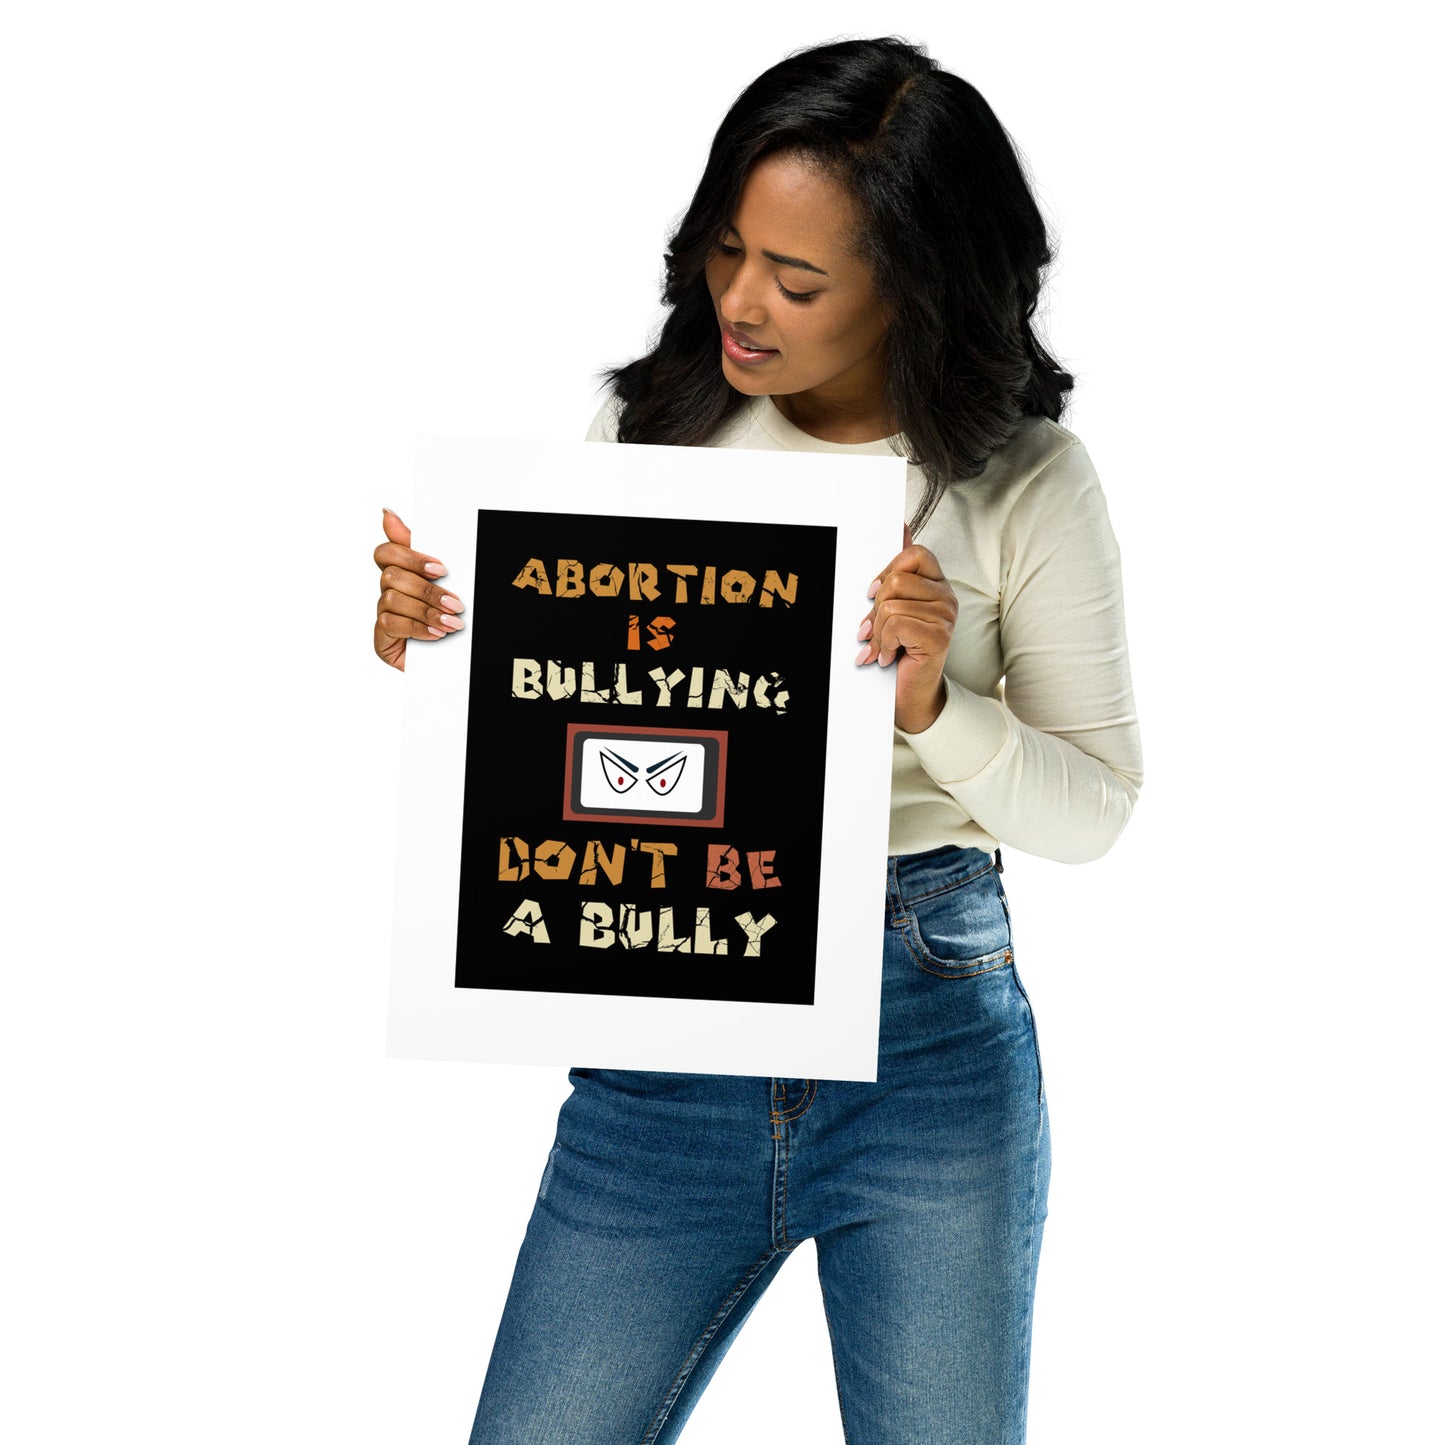 A001 Art Print - Museum Quality Giclée Print Featuring Sinister Eyes Graphic with text “Abortion is Bullying. Don’t be a Bully.”